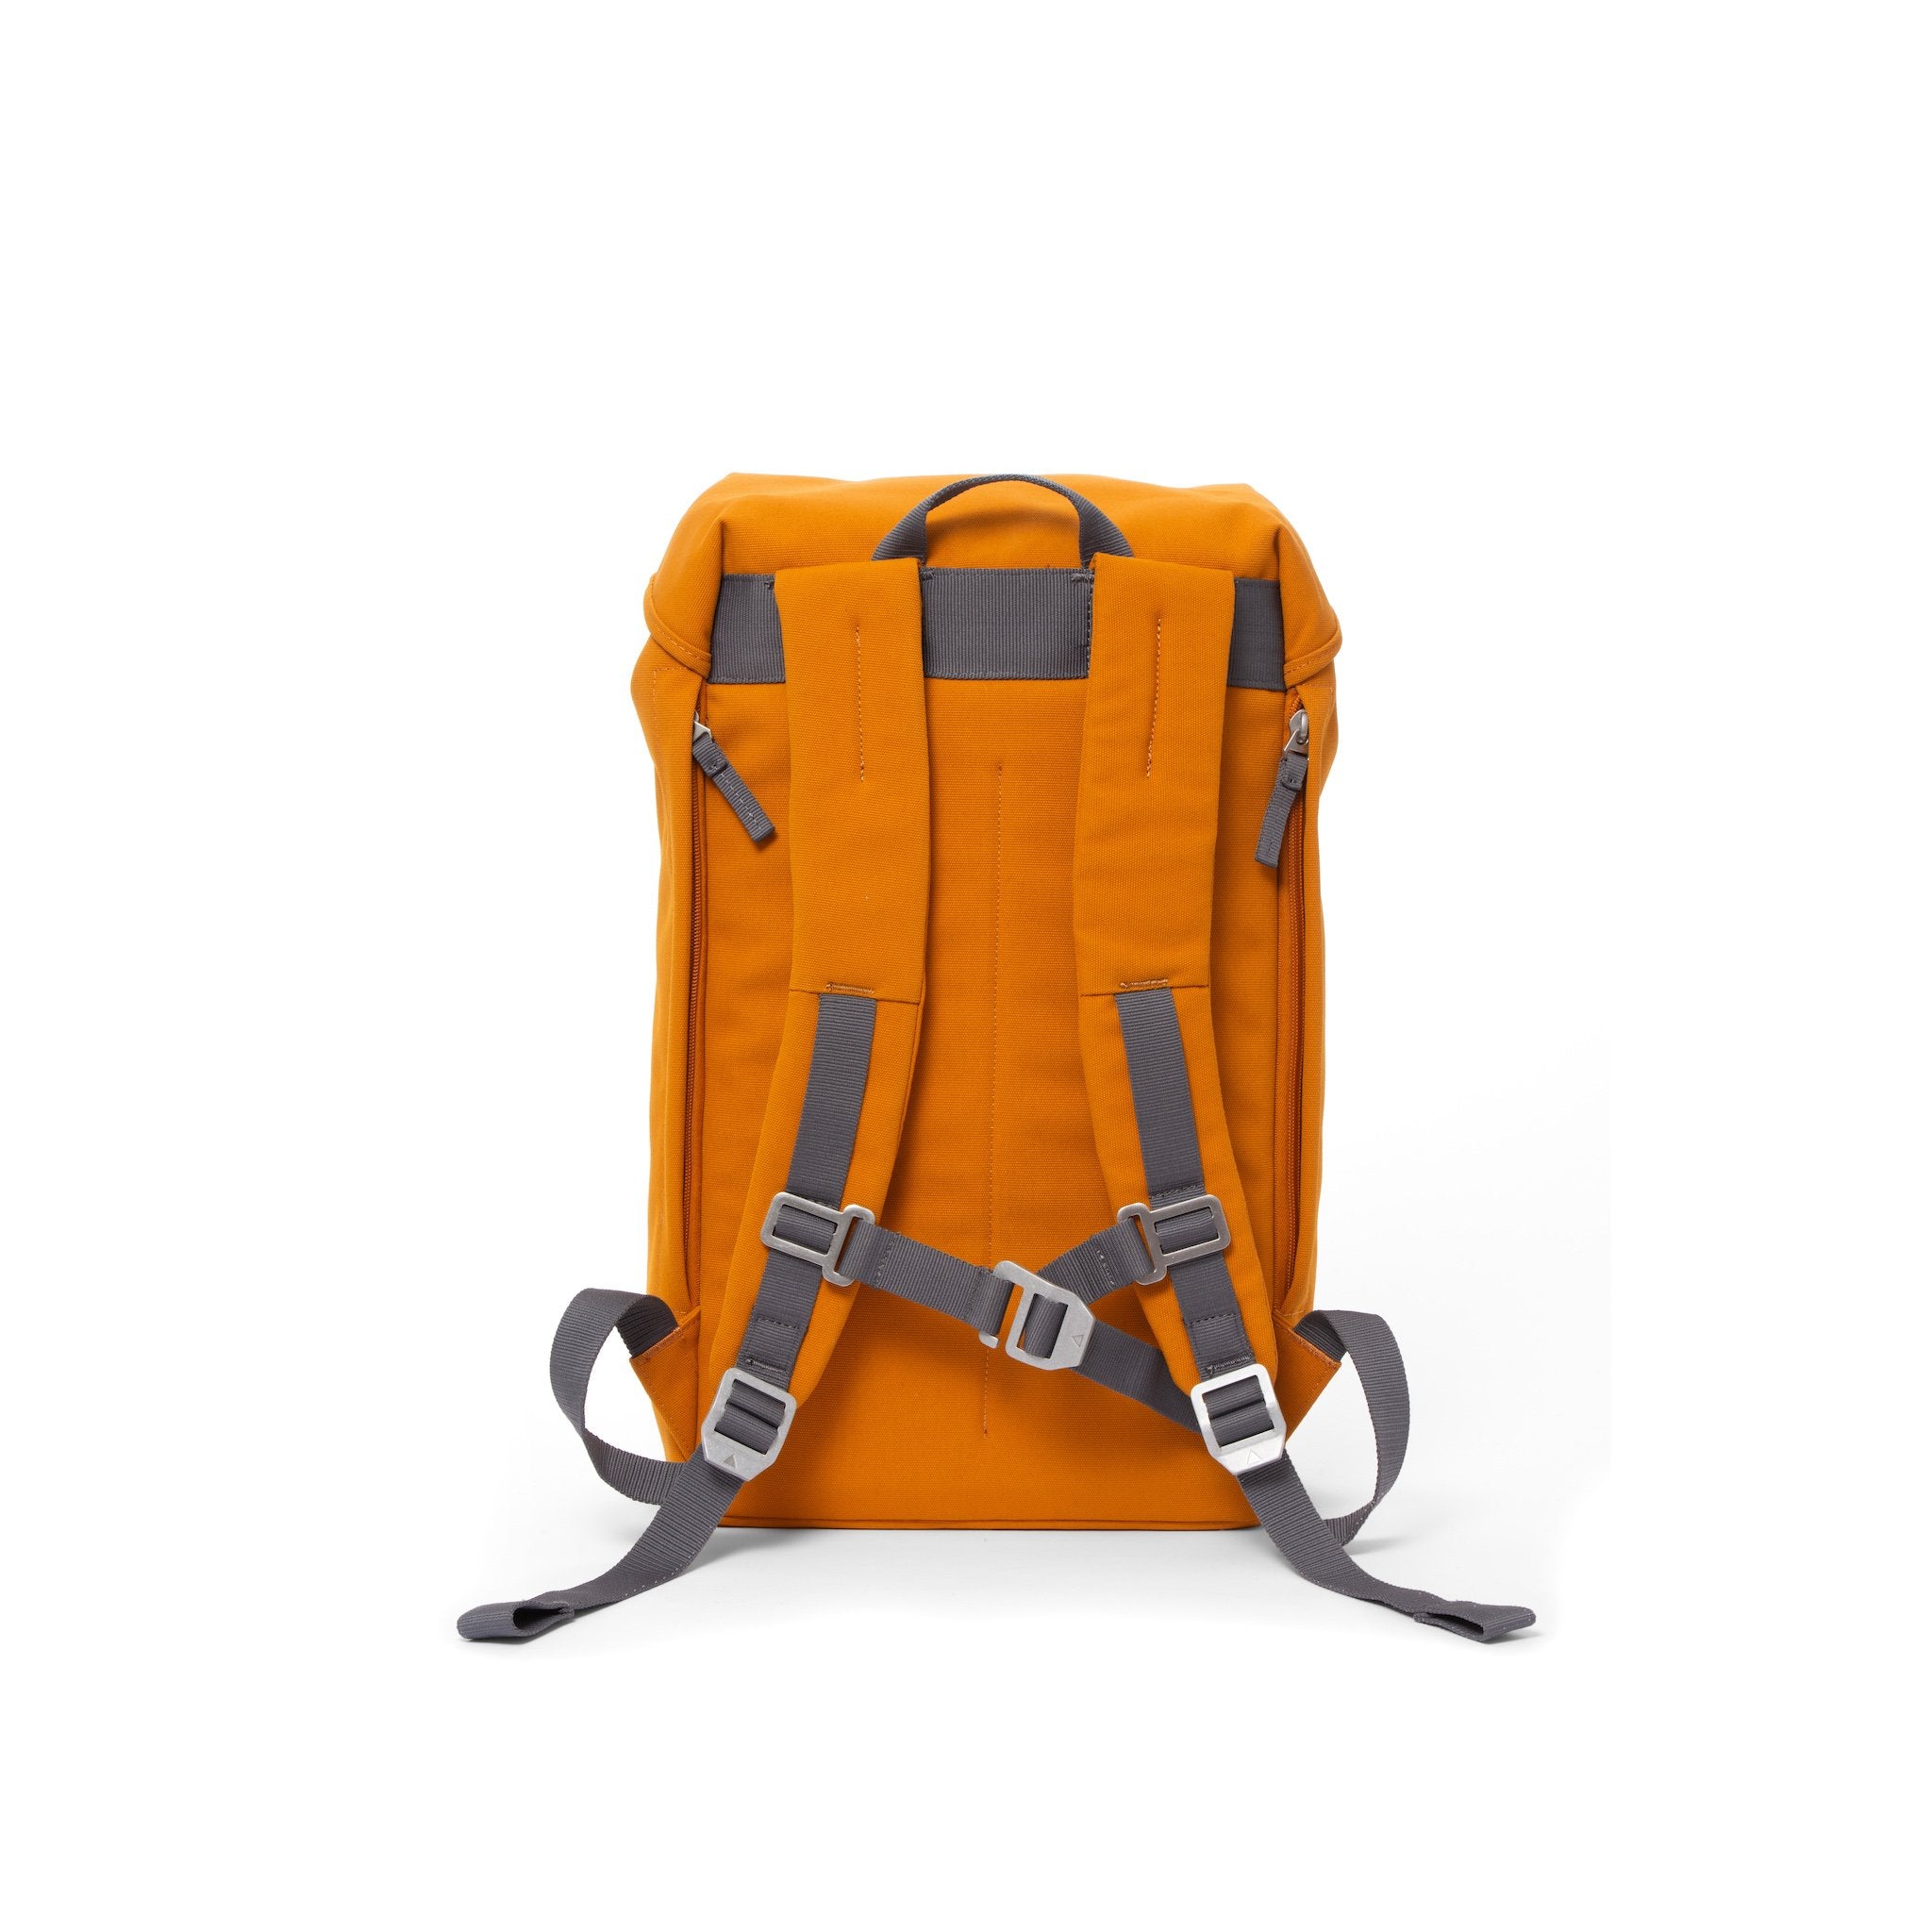 Orange waterproof backpack with padded shoulder straps and chest strap.